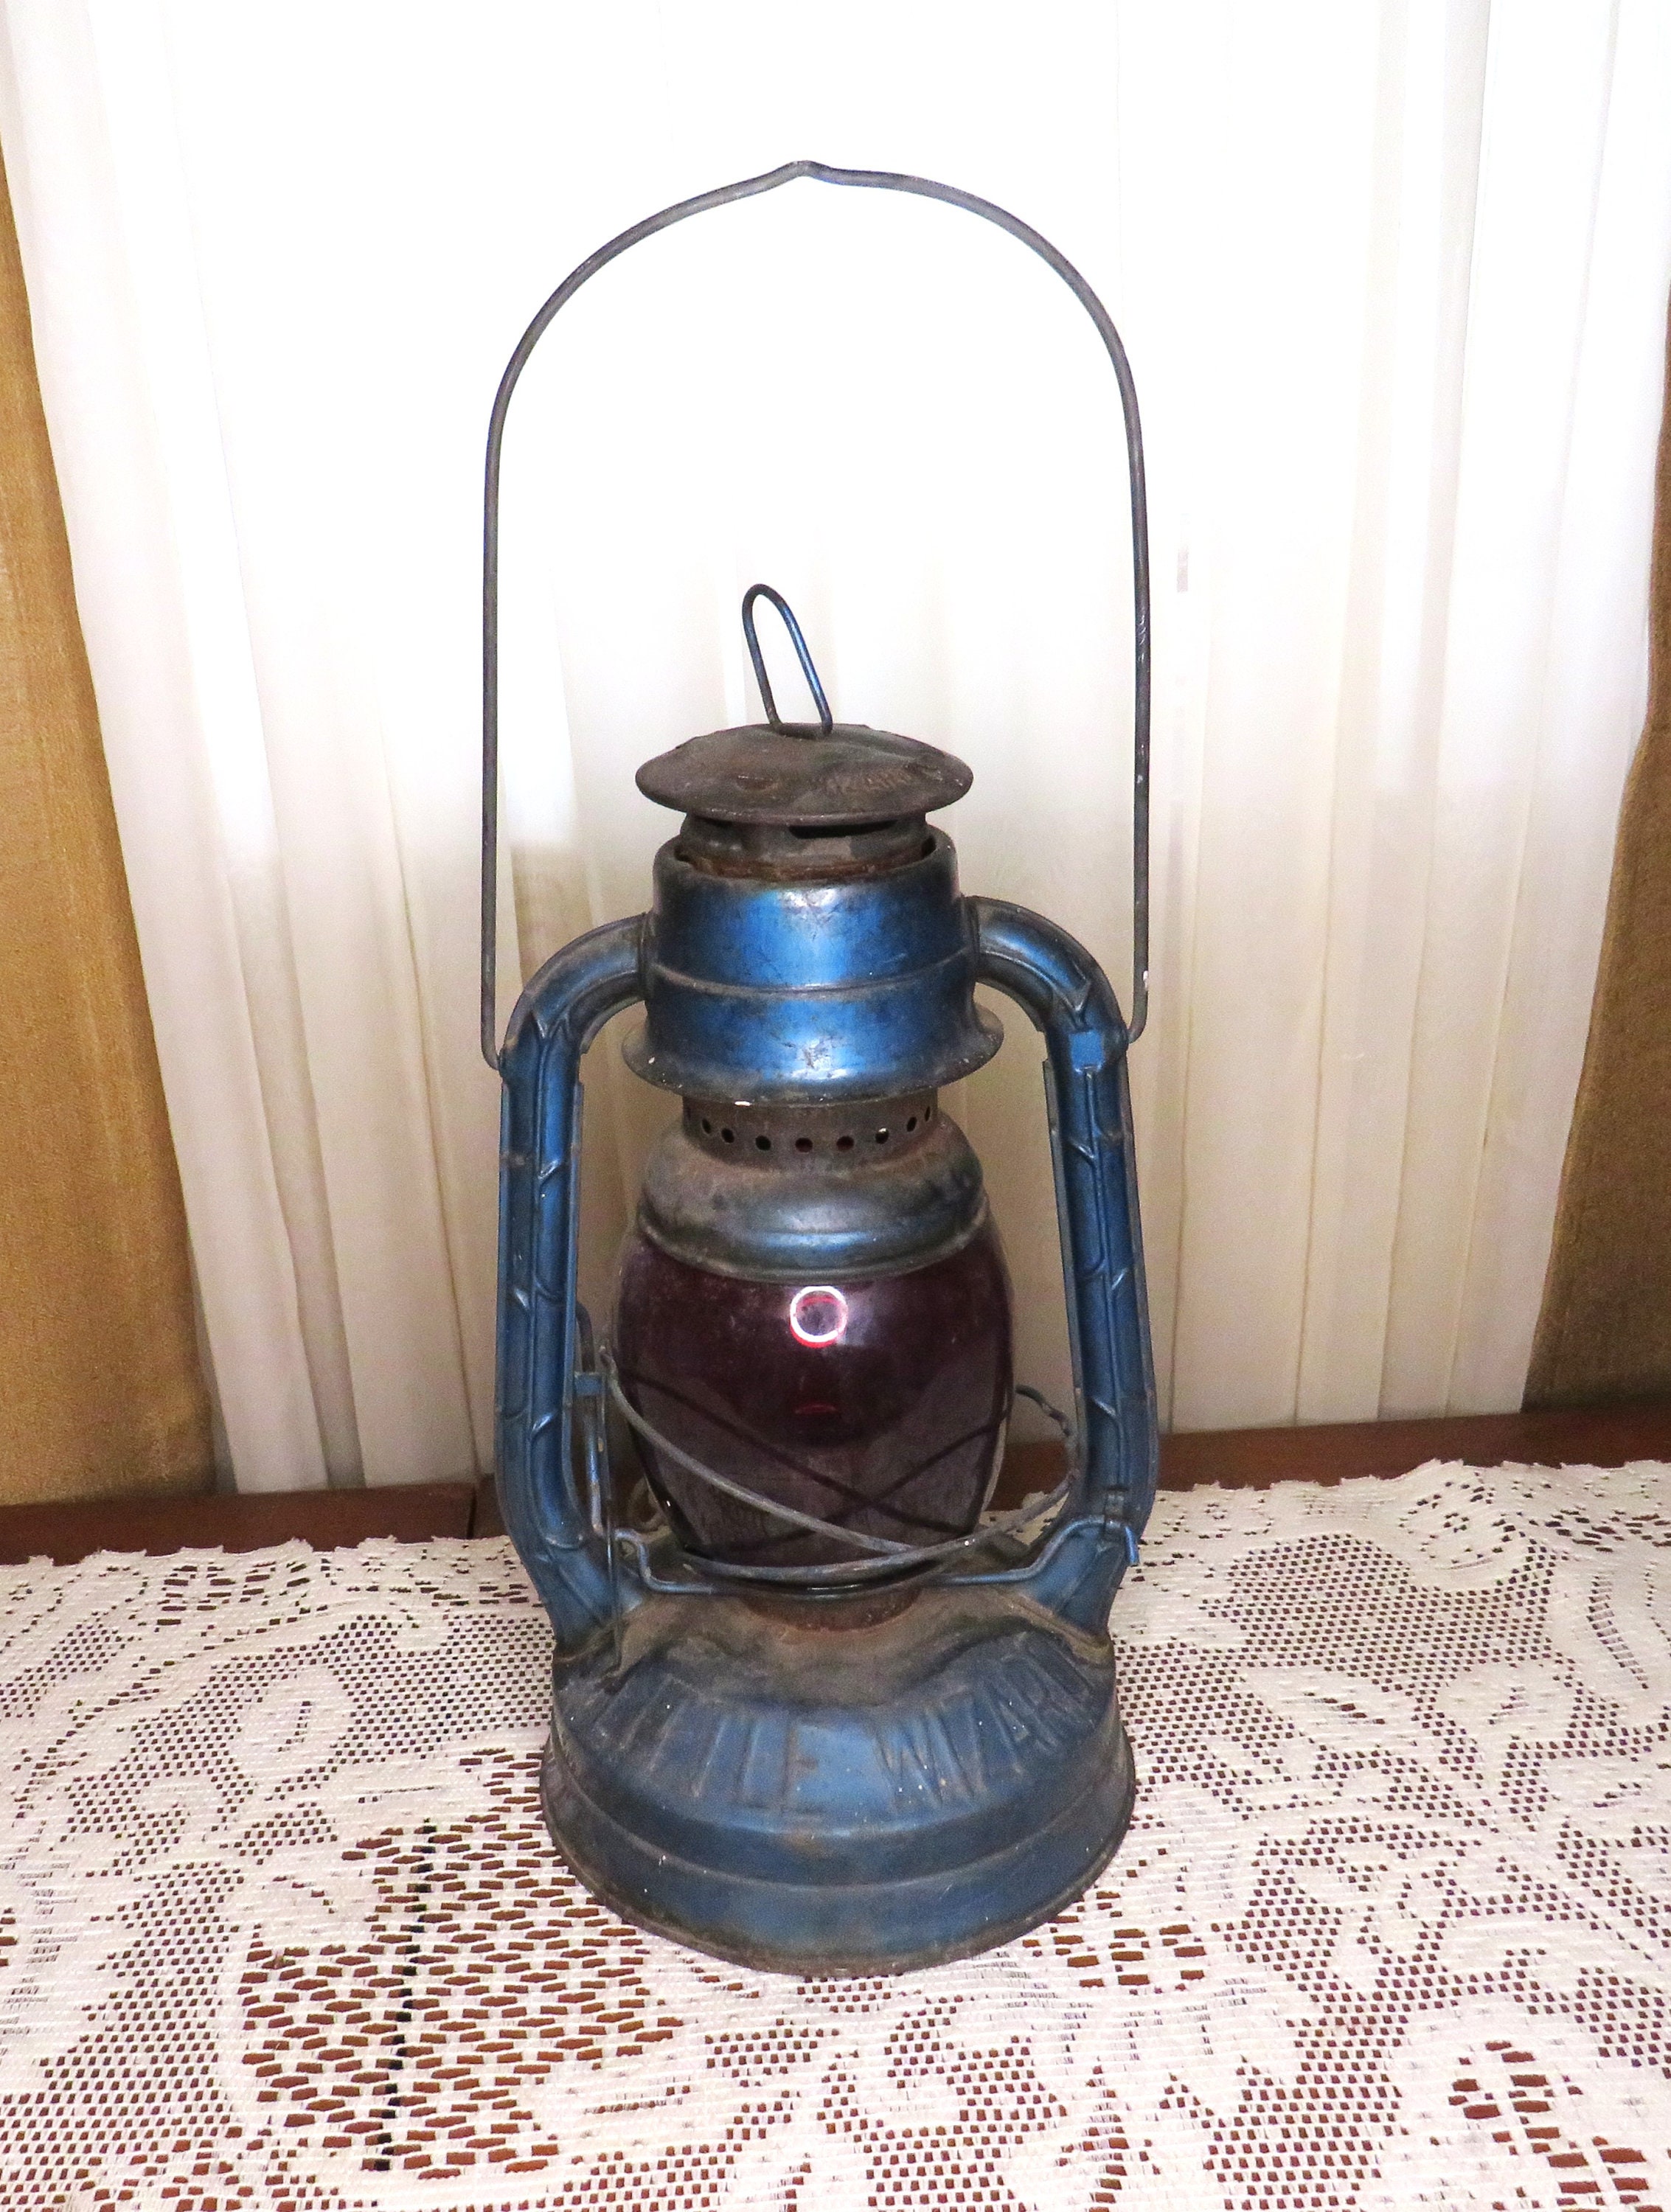 Dietz Oil Lantern, Christmas Red Lantern, Working Lantern, Wick and Globe,  All in Working Order. Christmas Decoration 